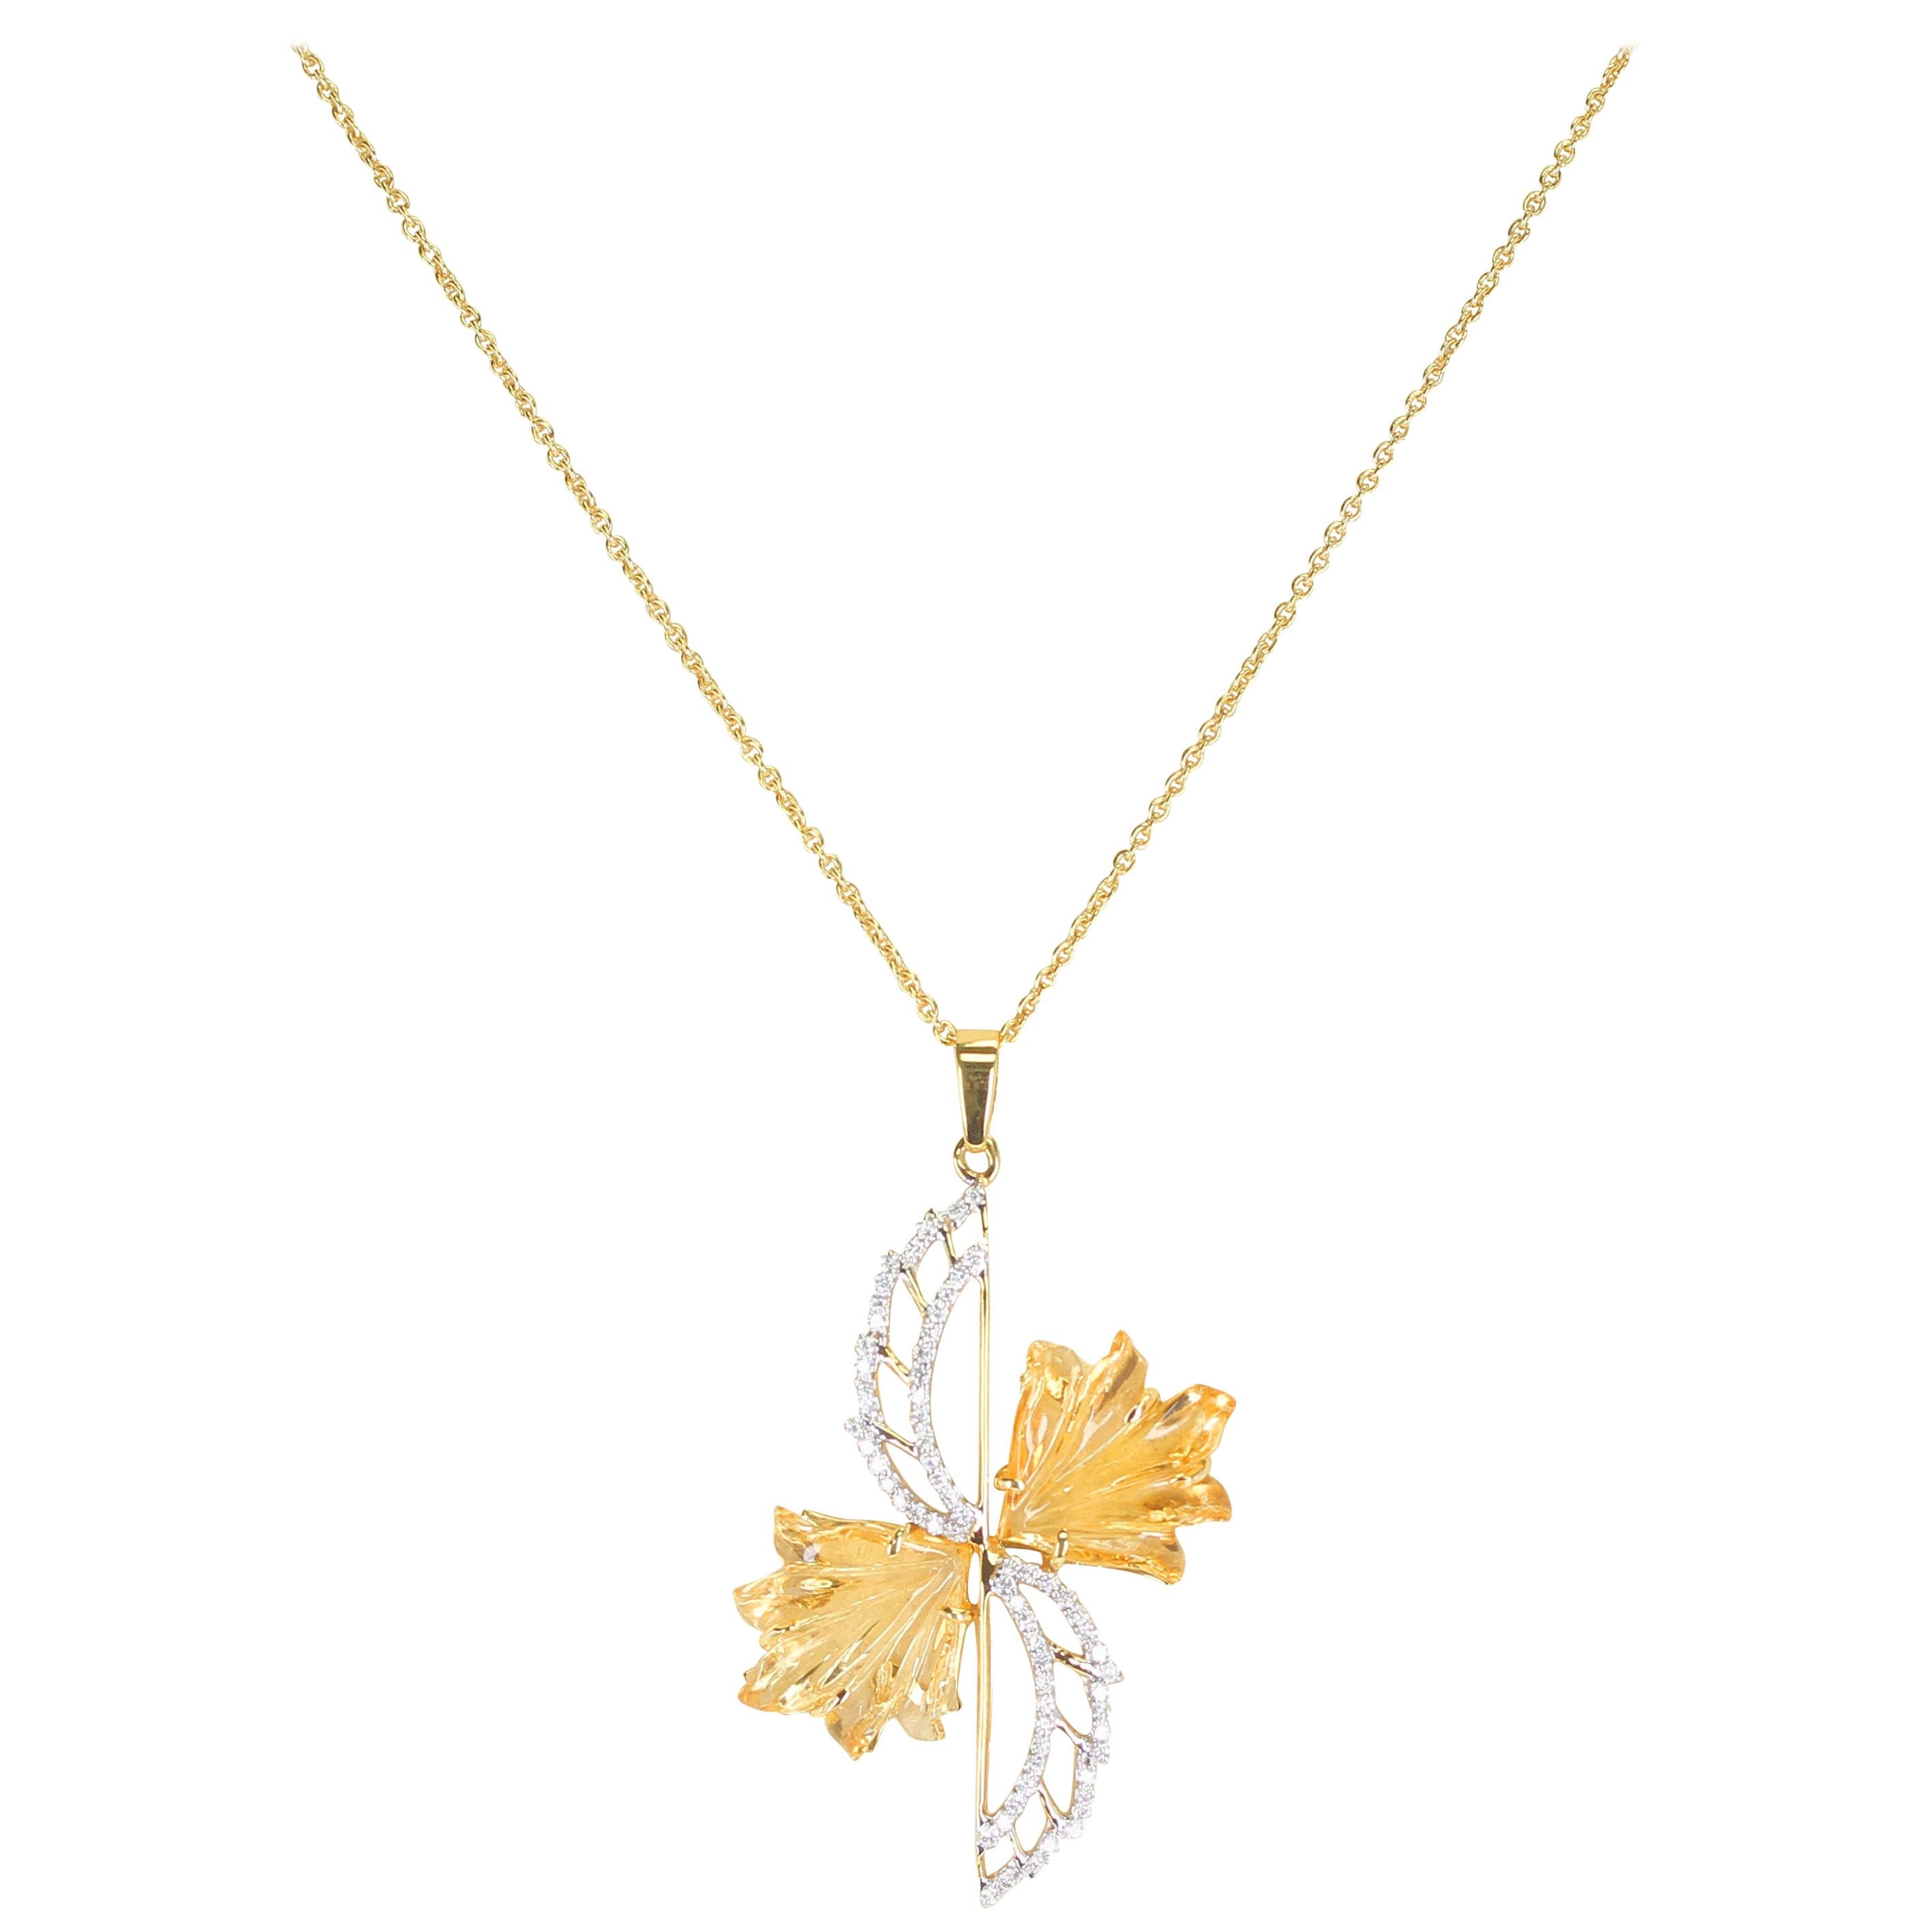 Carved Citrine and Diamond Pendant with Chain, 14 Karat Gold